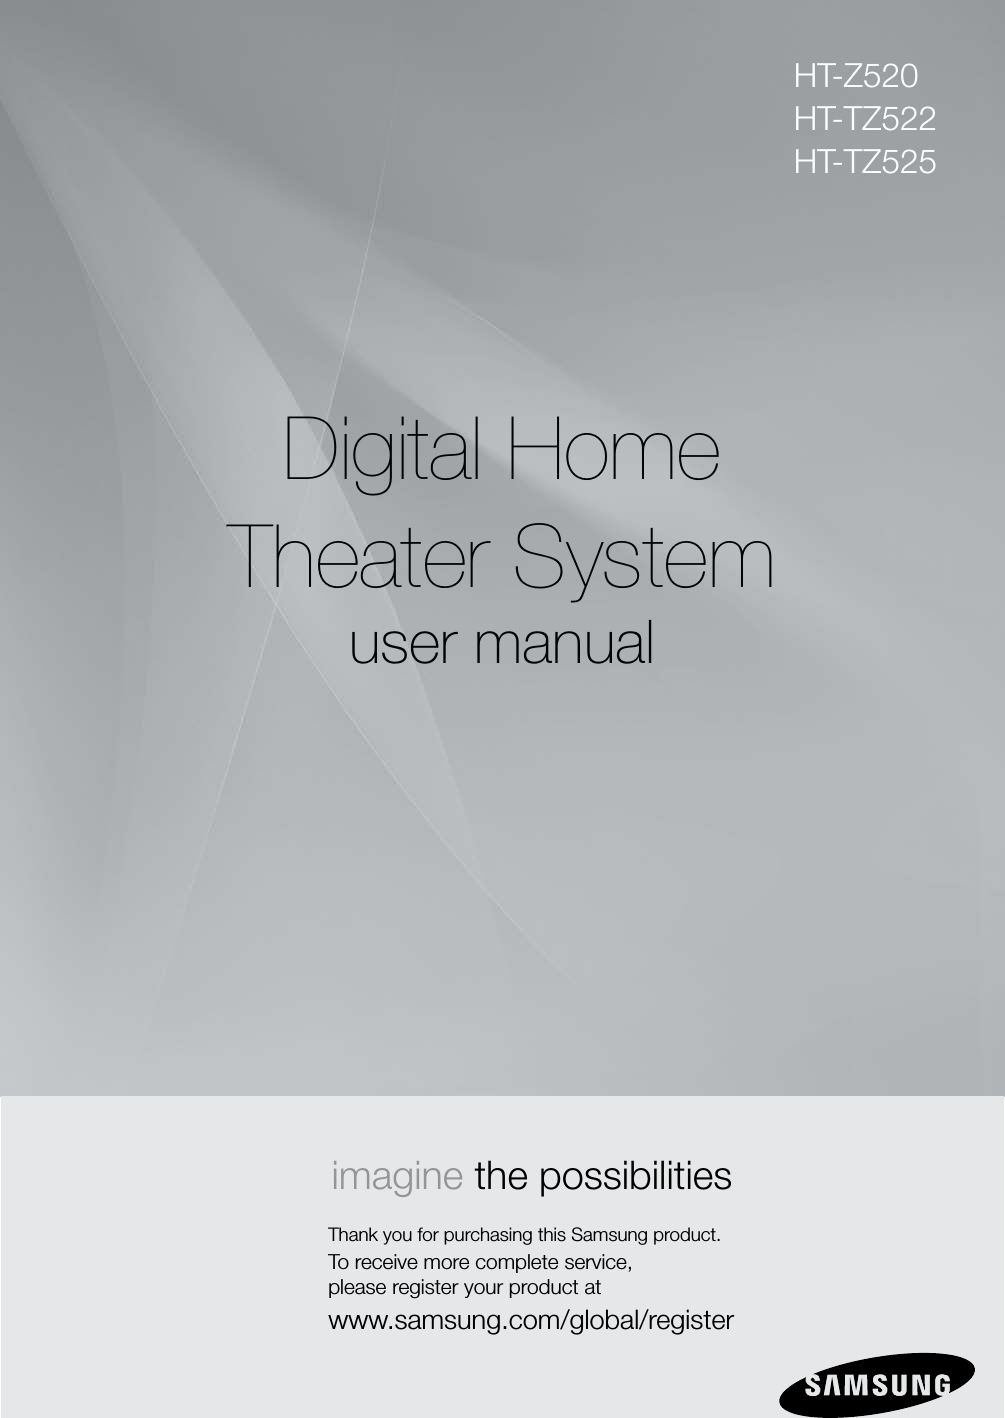 Digital HomeTheater Systemuser manualimagine the possibilitiesThank you for purchasing this Samsung product.To receive more complete service,  please register your product atwww.samsung.com/global/registerHT-Z520HT-TZ522HT-TZ525